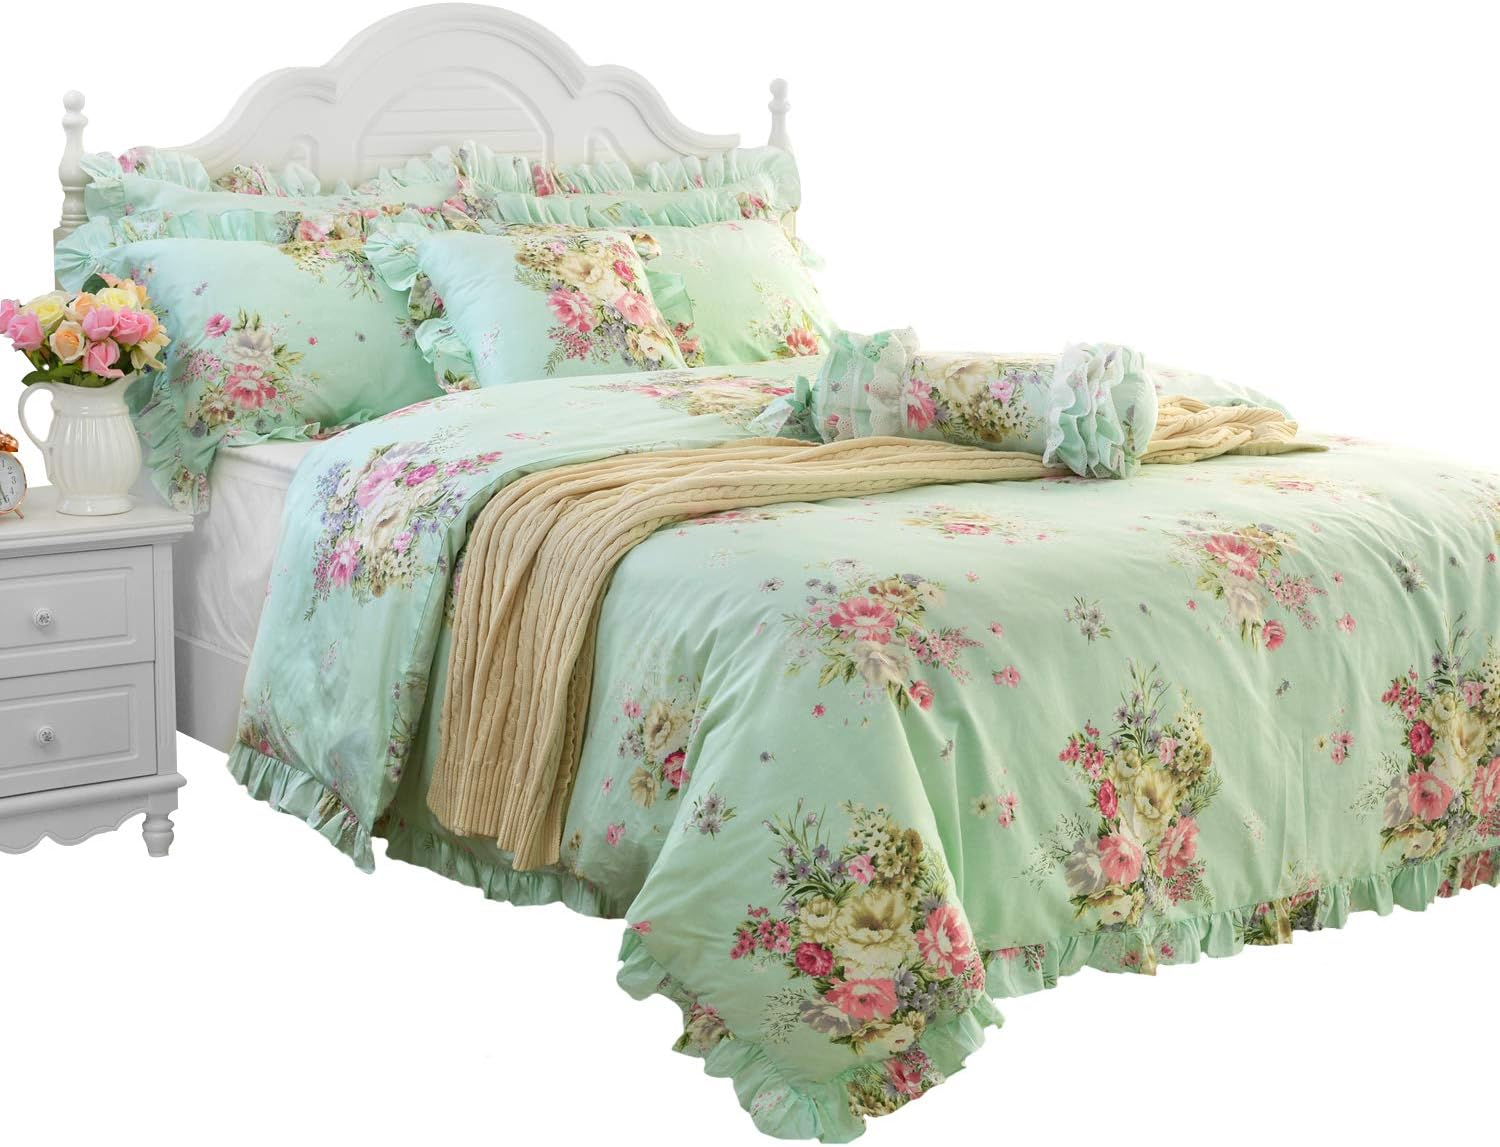 FADFAY Green Floral Duvet Cover Sets Vintage Flower Printed Bedding Ultra Soft 100% Cotton Designer Bedding Set 3 Pieces, 1duvet Cover & 2pillowcases (Queen Size, Ruffle Style)